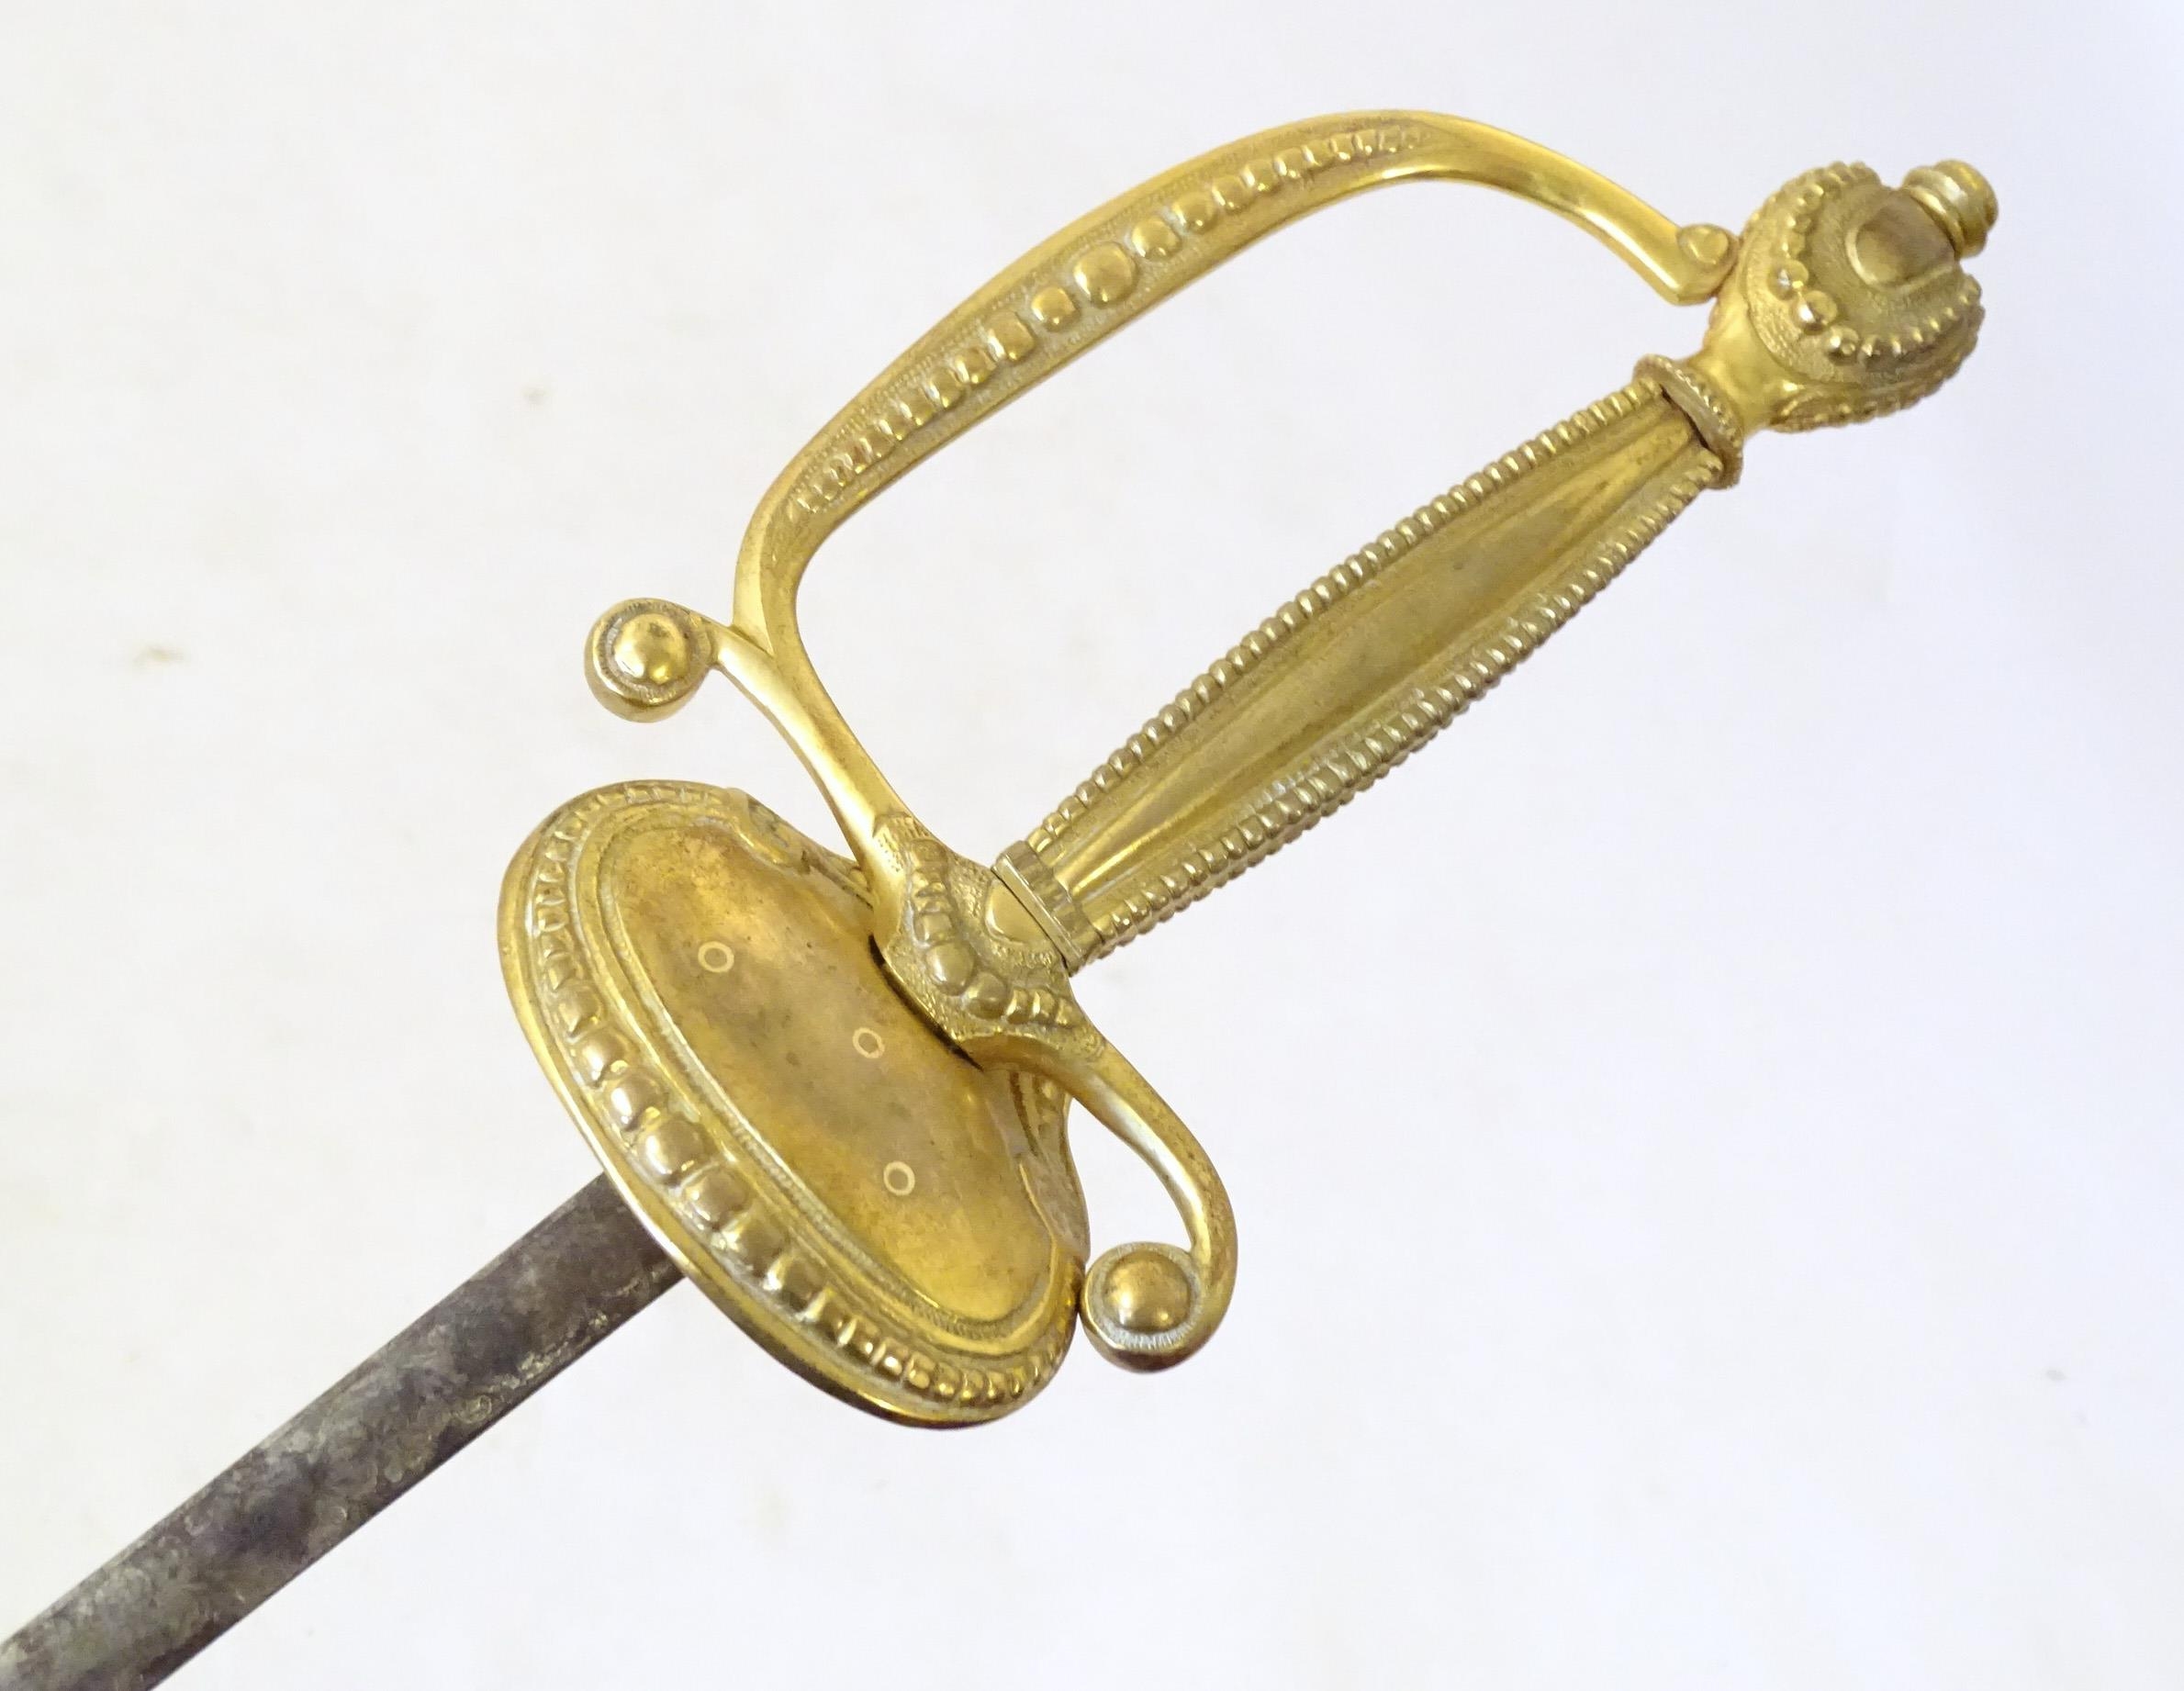 Militaria: an early to mid 20thC English court sword, the 30 3/4" steel blade decorated with - Image 7 of 15